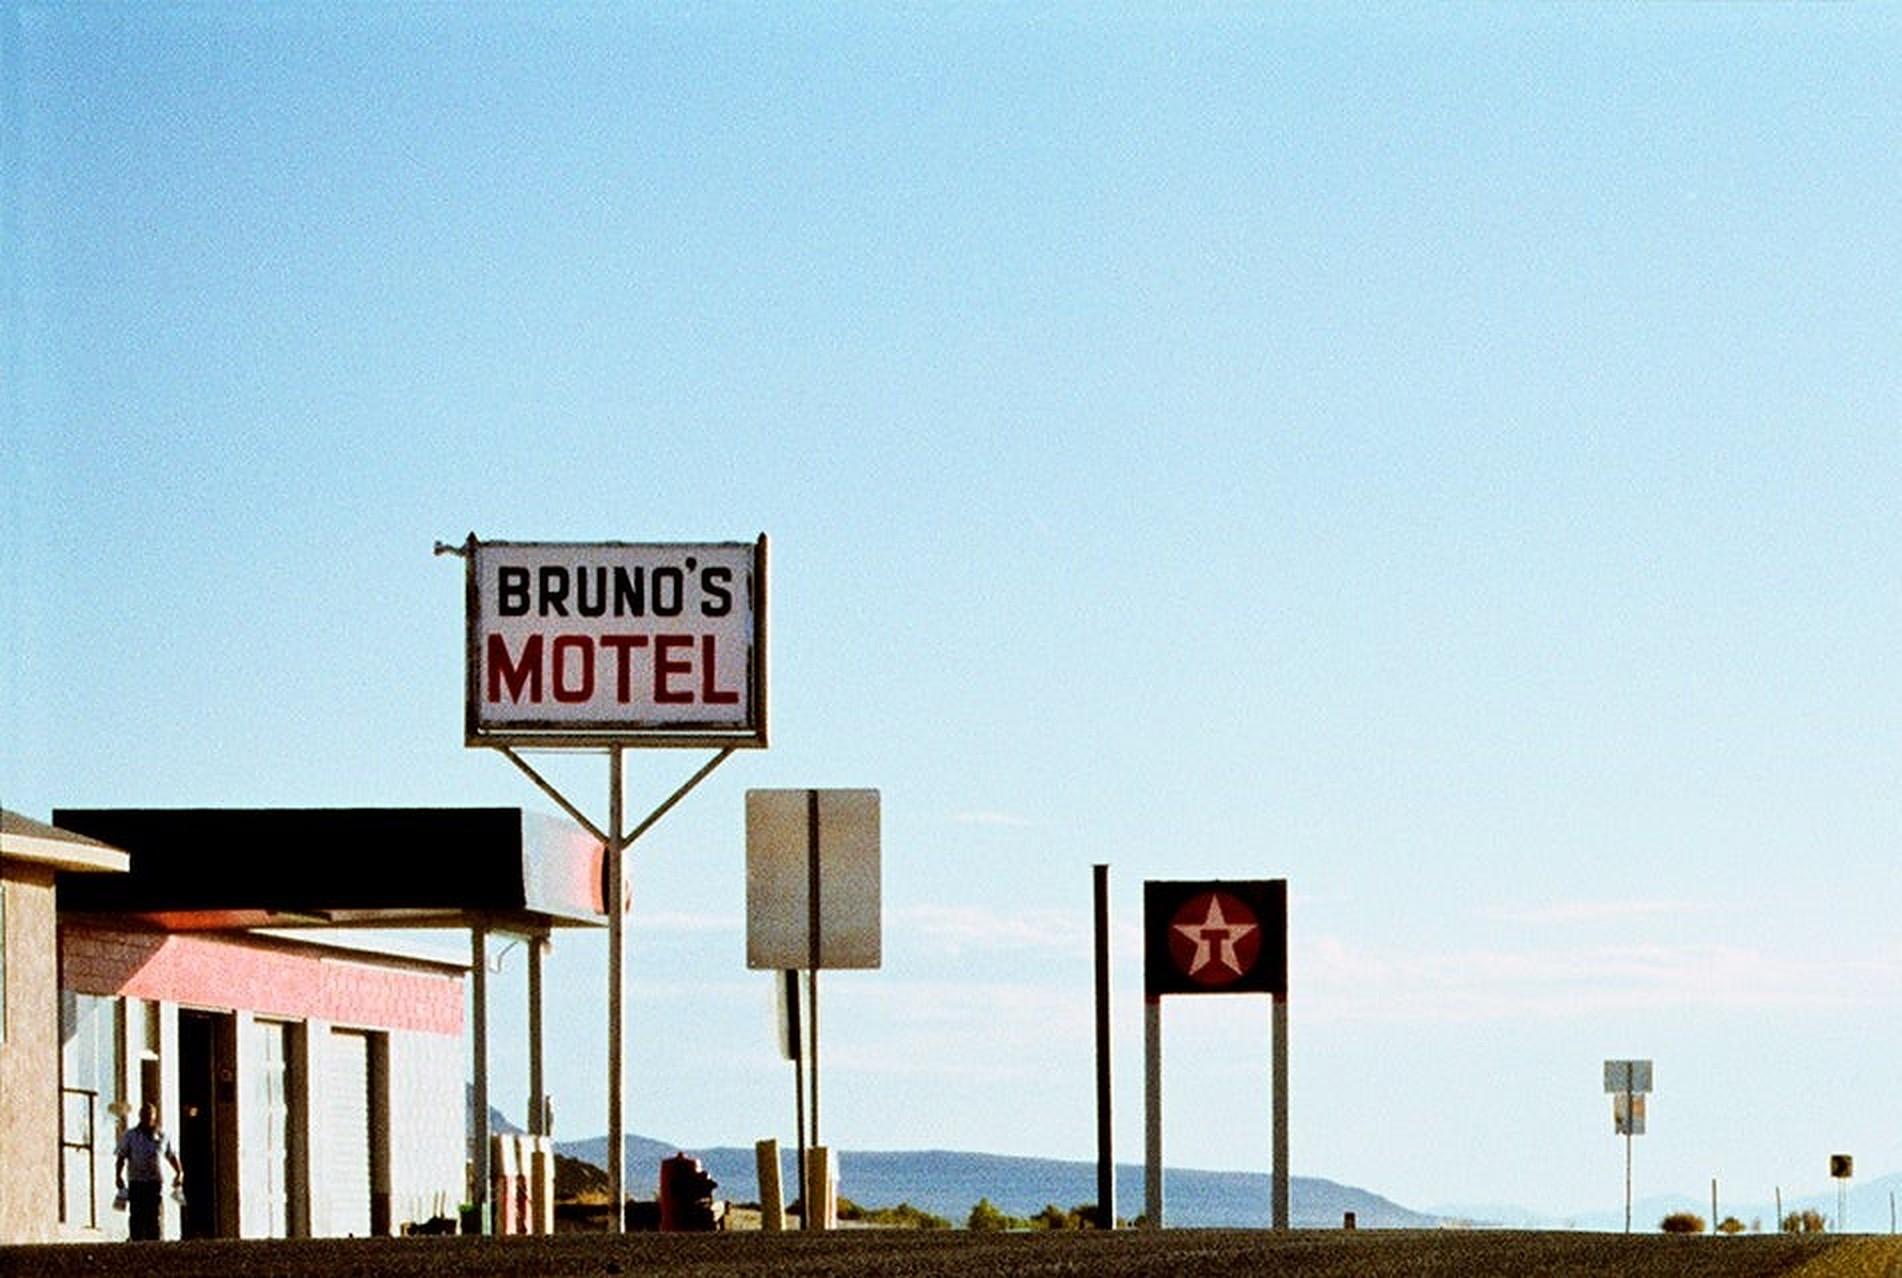 Please bear in mind that all prints are produced to order and lead times are between 15-20 days. 

Bruno's Motel is a stunning C-Type Print by contemporary photographer Samuel Hicks.
It is available in this size in an Edition of 25, and is sold